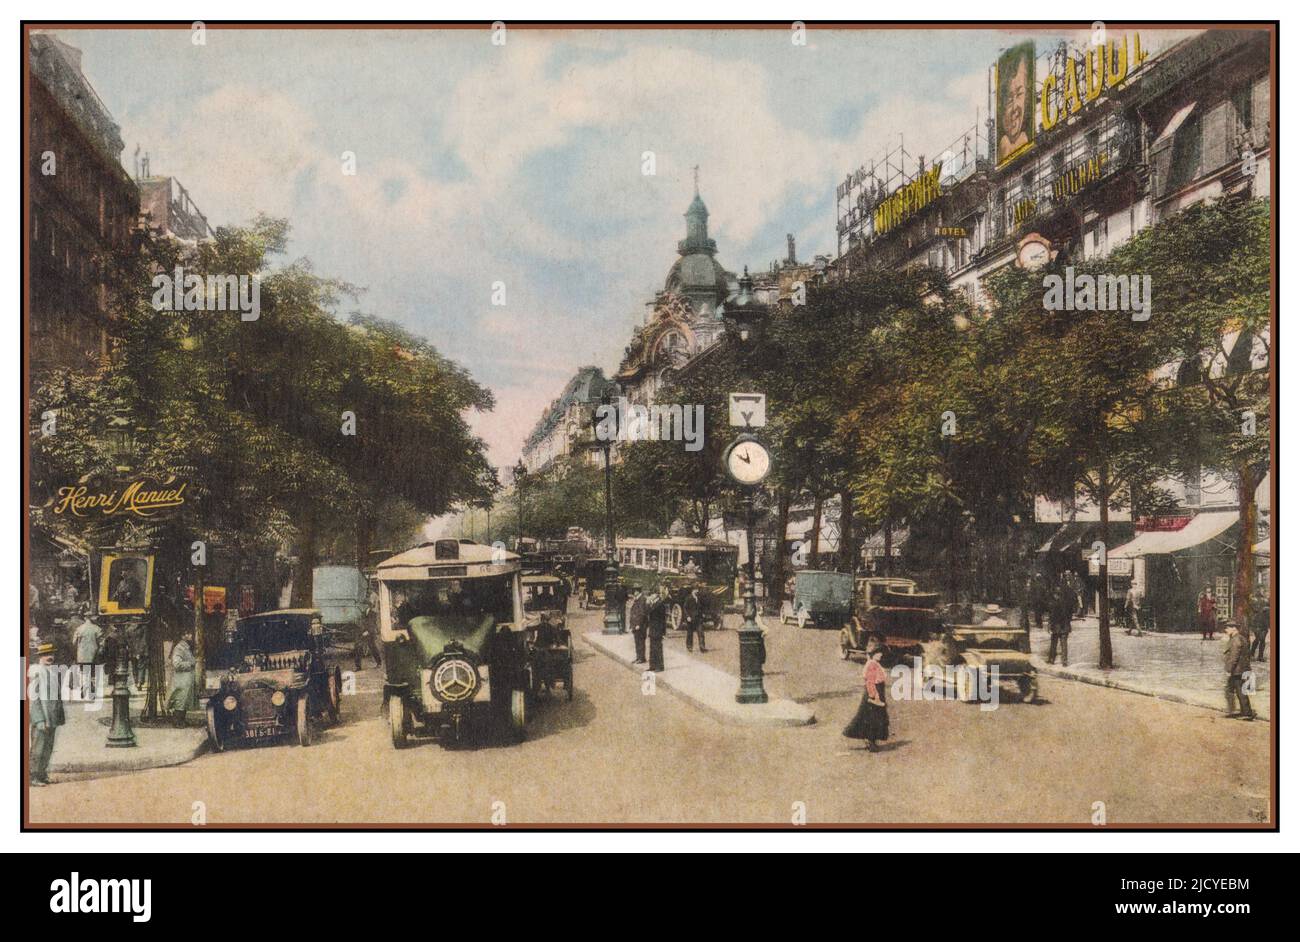 Vintage Paris Postcard 1890s chromolithograph of the Boulevard des Italiens, with Mercedes Autobus in foreground. Paris France. Lively Boulevard des Italiens (buses, cars, vans, passers-by) seen from the Drouot crossroads towards the west with, on the left, the end of the rue de Richelieu and on the right the dome with the lantern of the old Café Riche (n° 16, at the corner of rue Le Peletier n° 1). Vehicle: public transport bus, line E, of the Mercedes manufacture with the three pointed star symbol Stock Photo